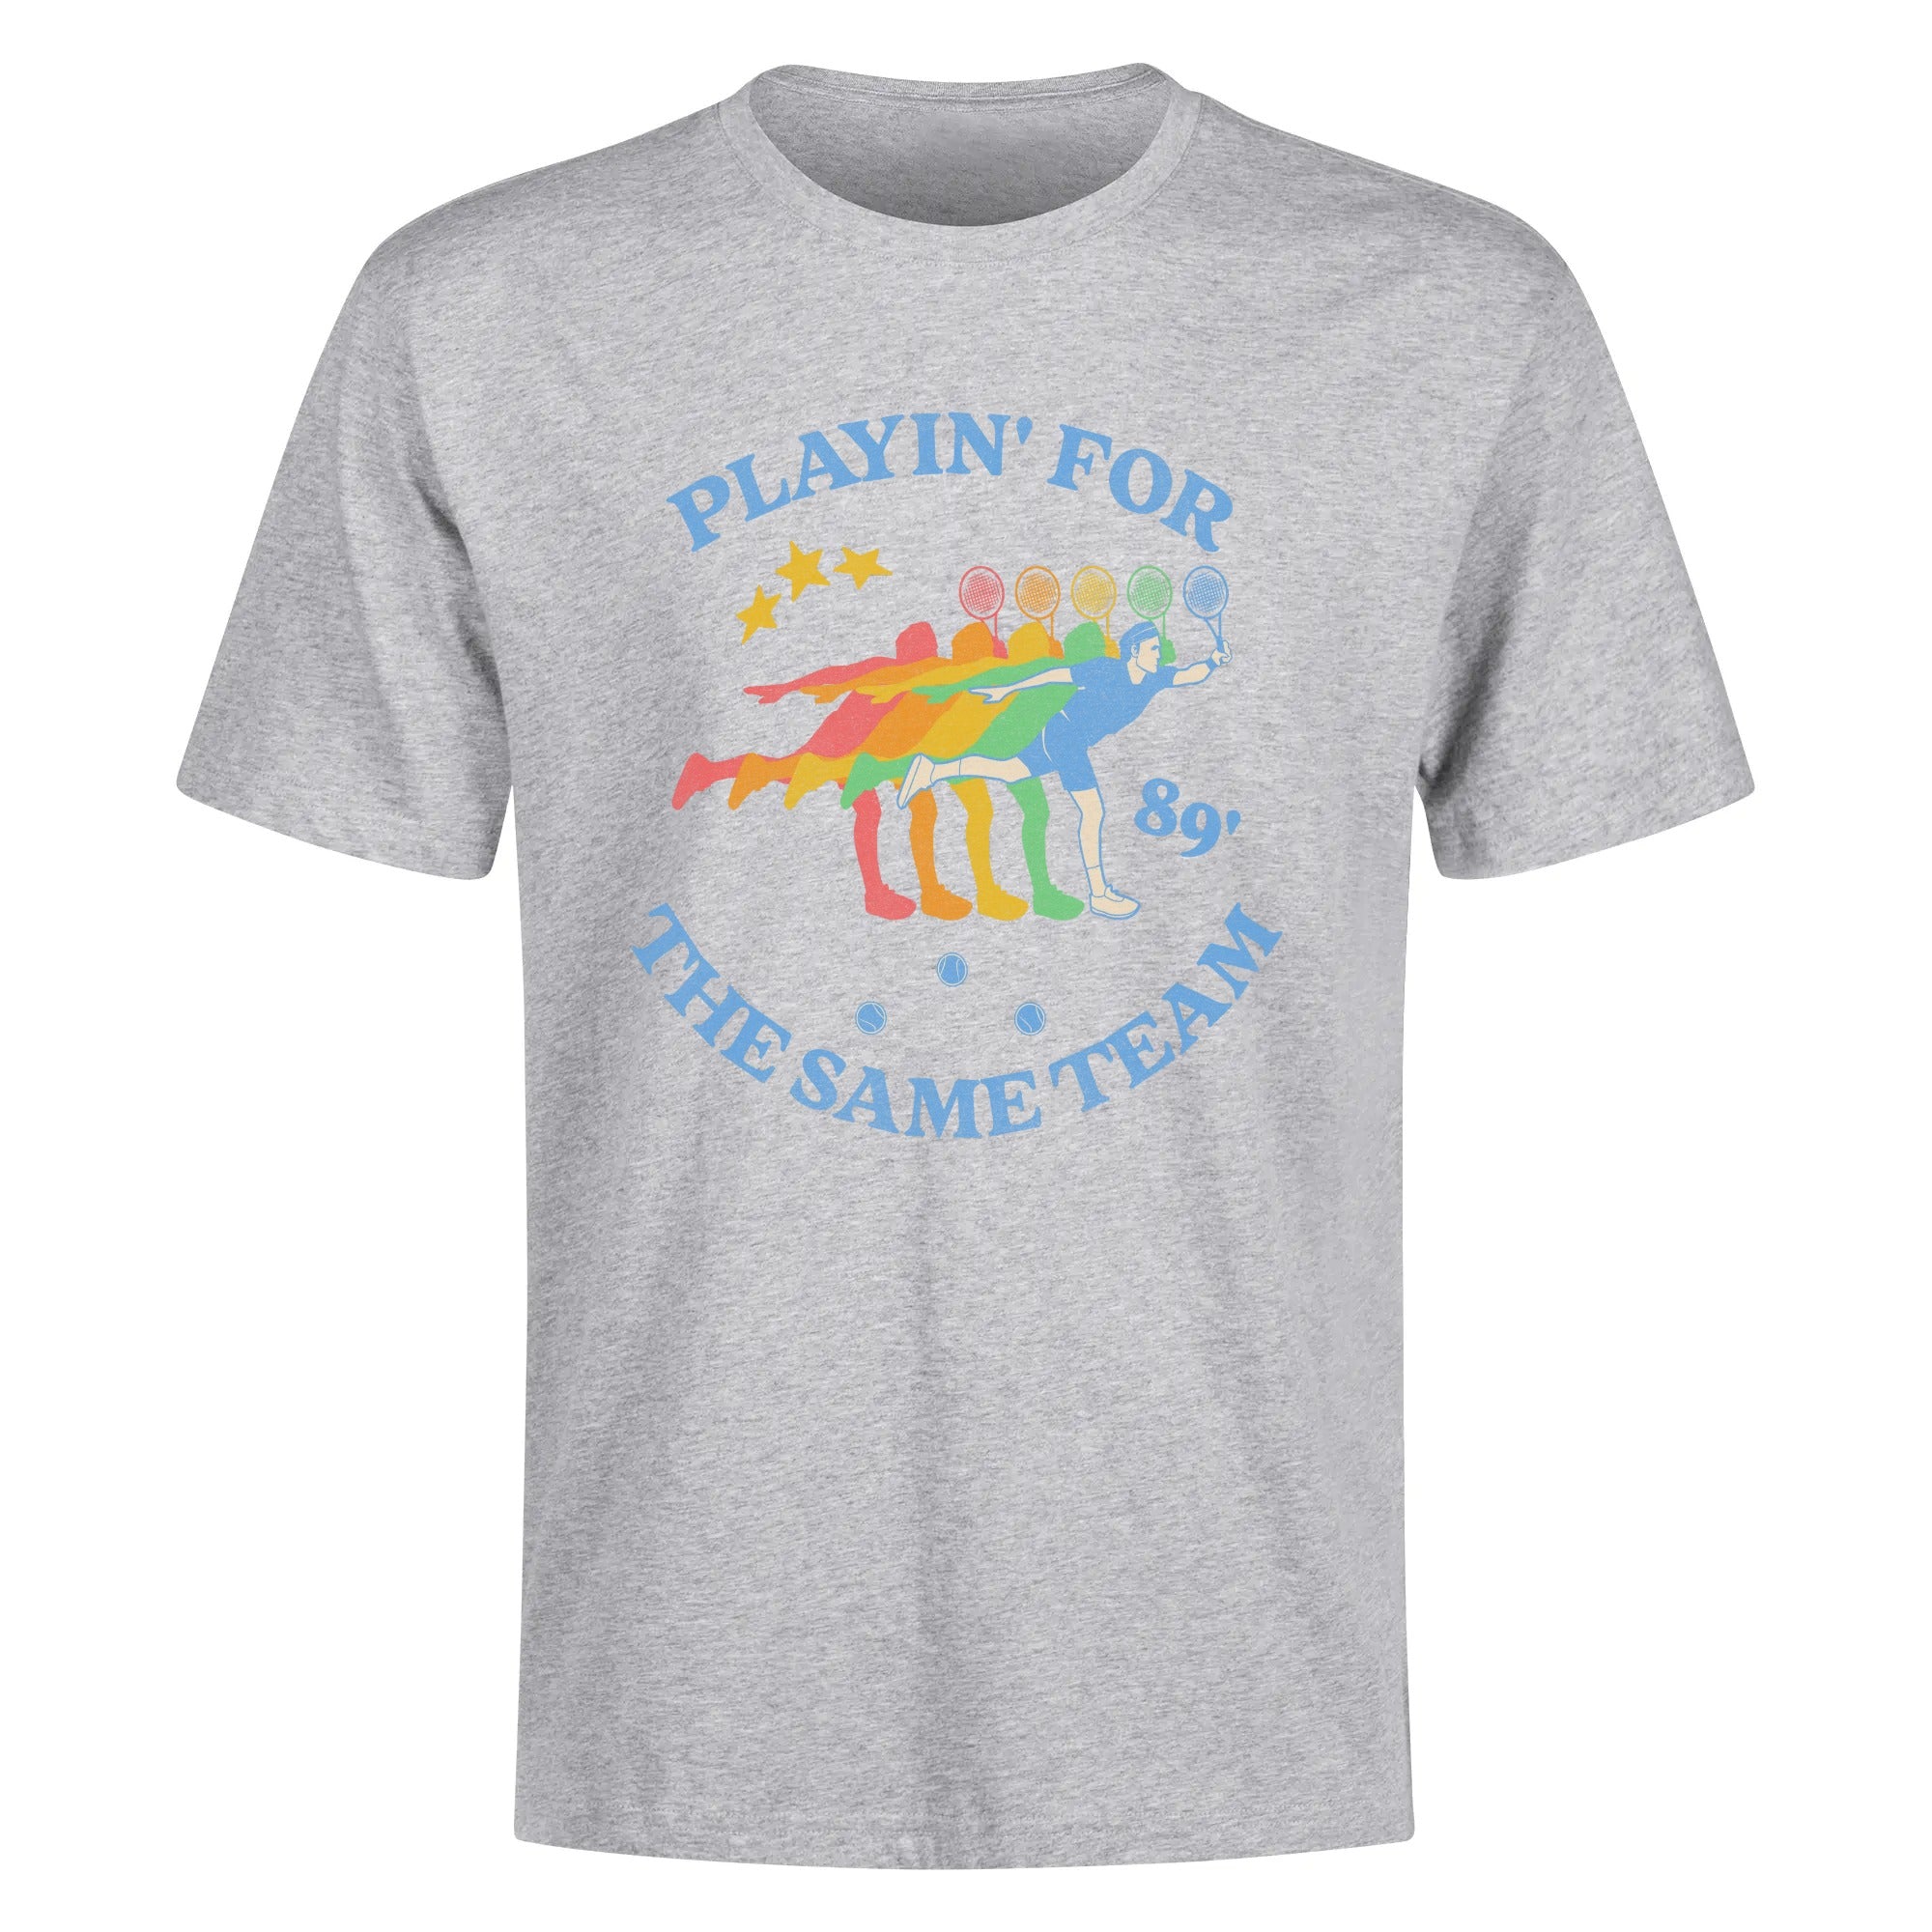 Playin' For the Same Team T-Shirt - Rose Gold Co. Shop